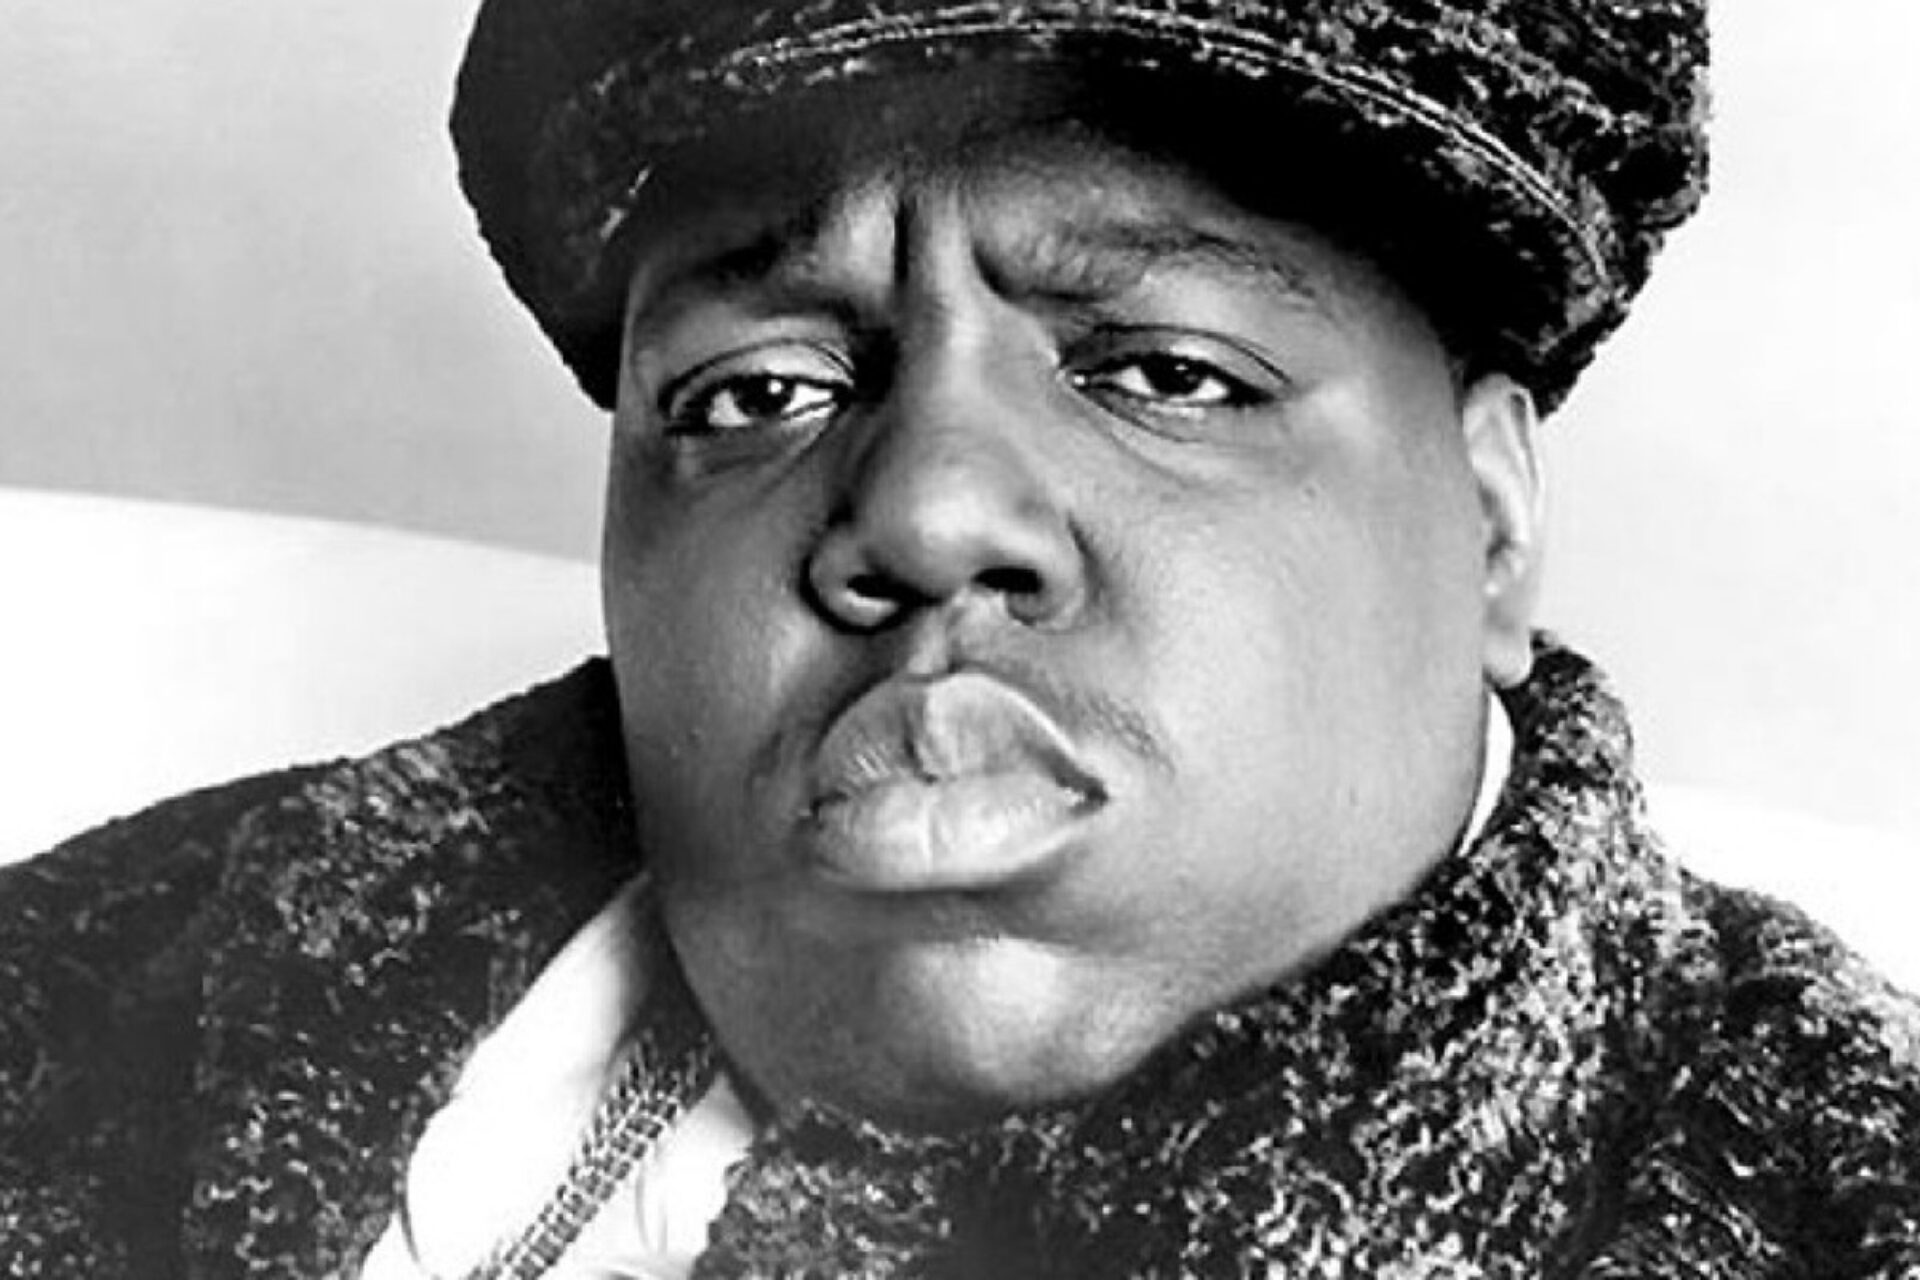 Biggie Smalls and Budweiser bringing 'Juicy' offering for hip-hop